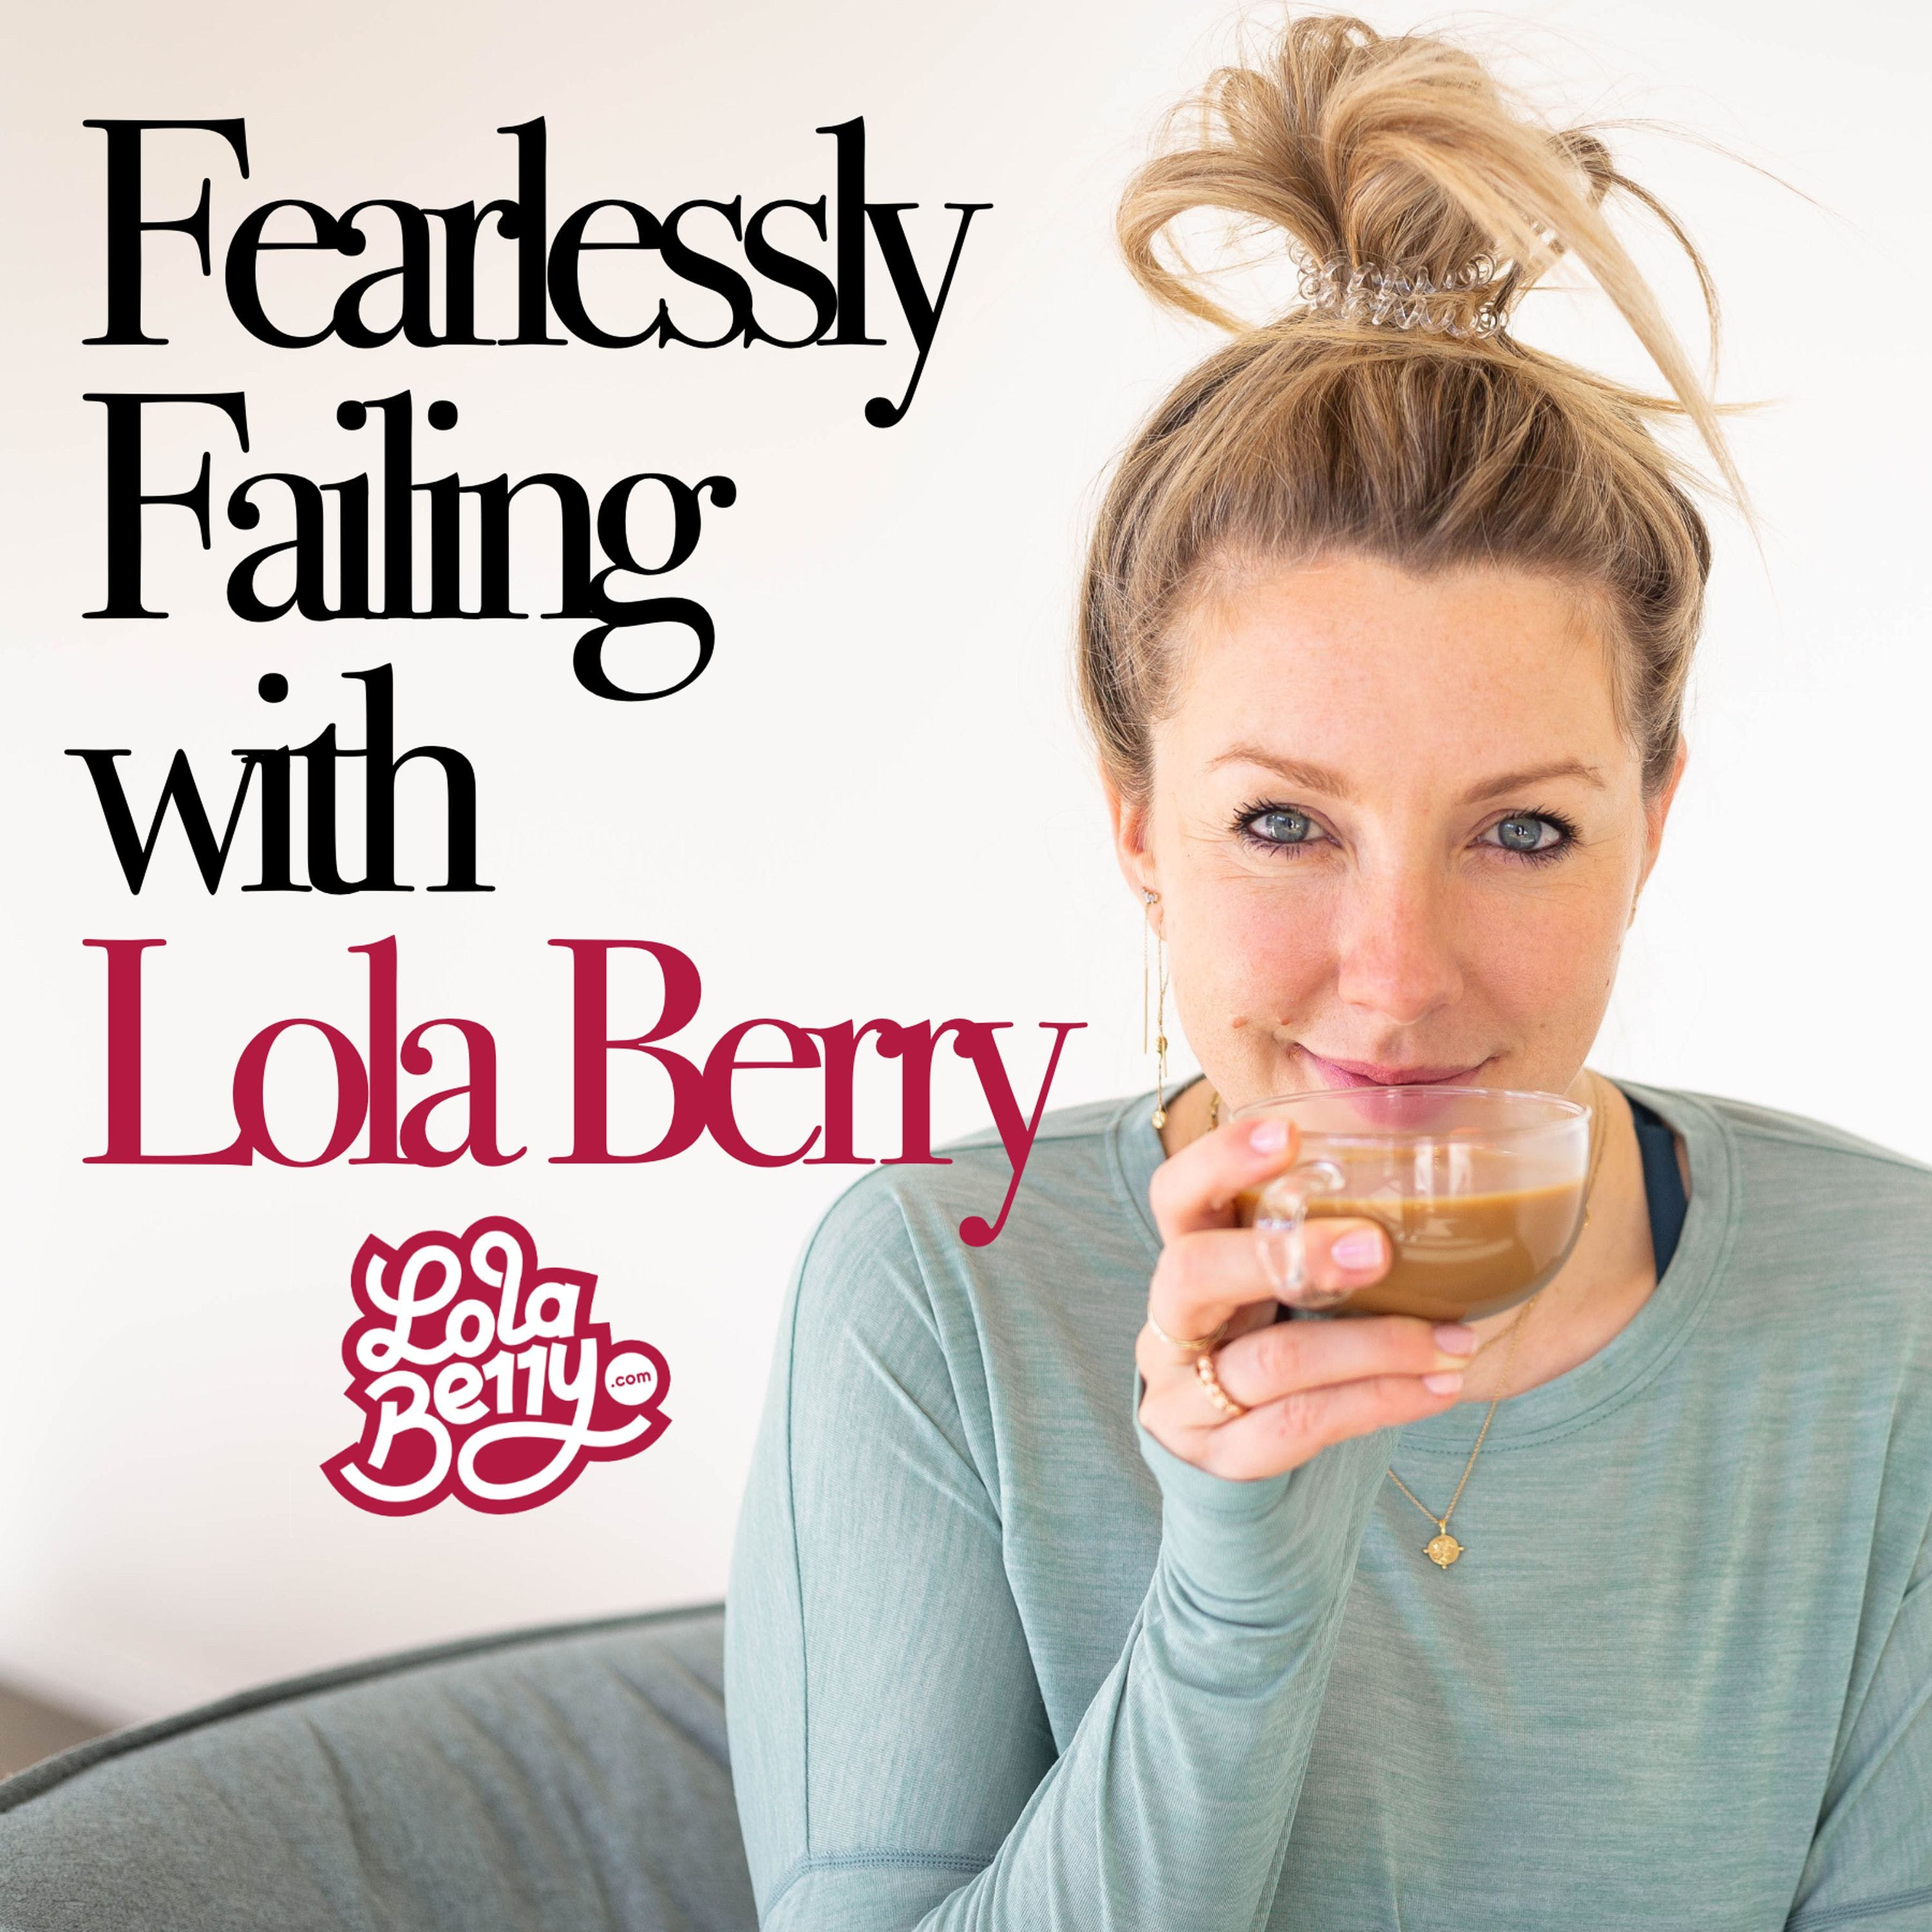 7. Fearlessly Failing: Olivia White